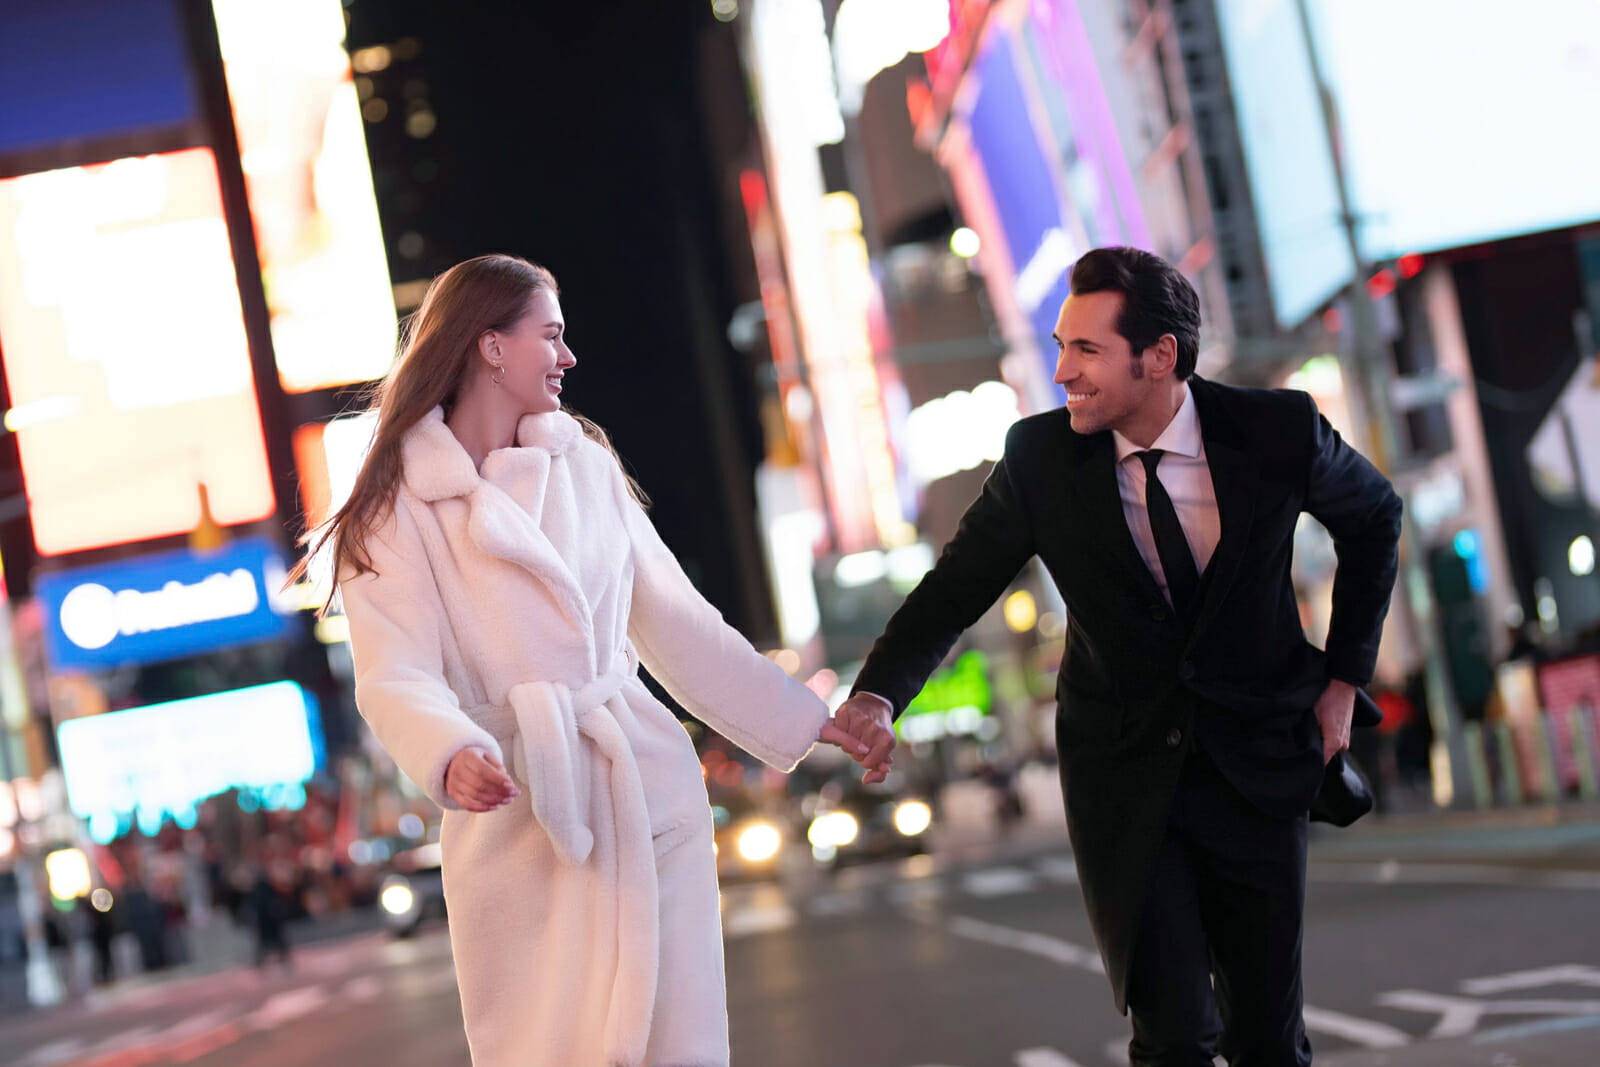 Cute Times Square engagement Photos